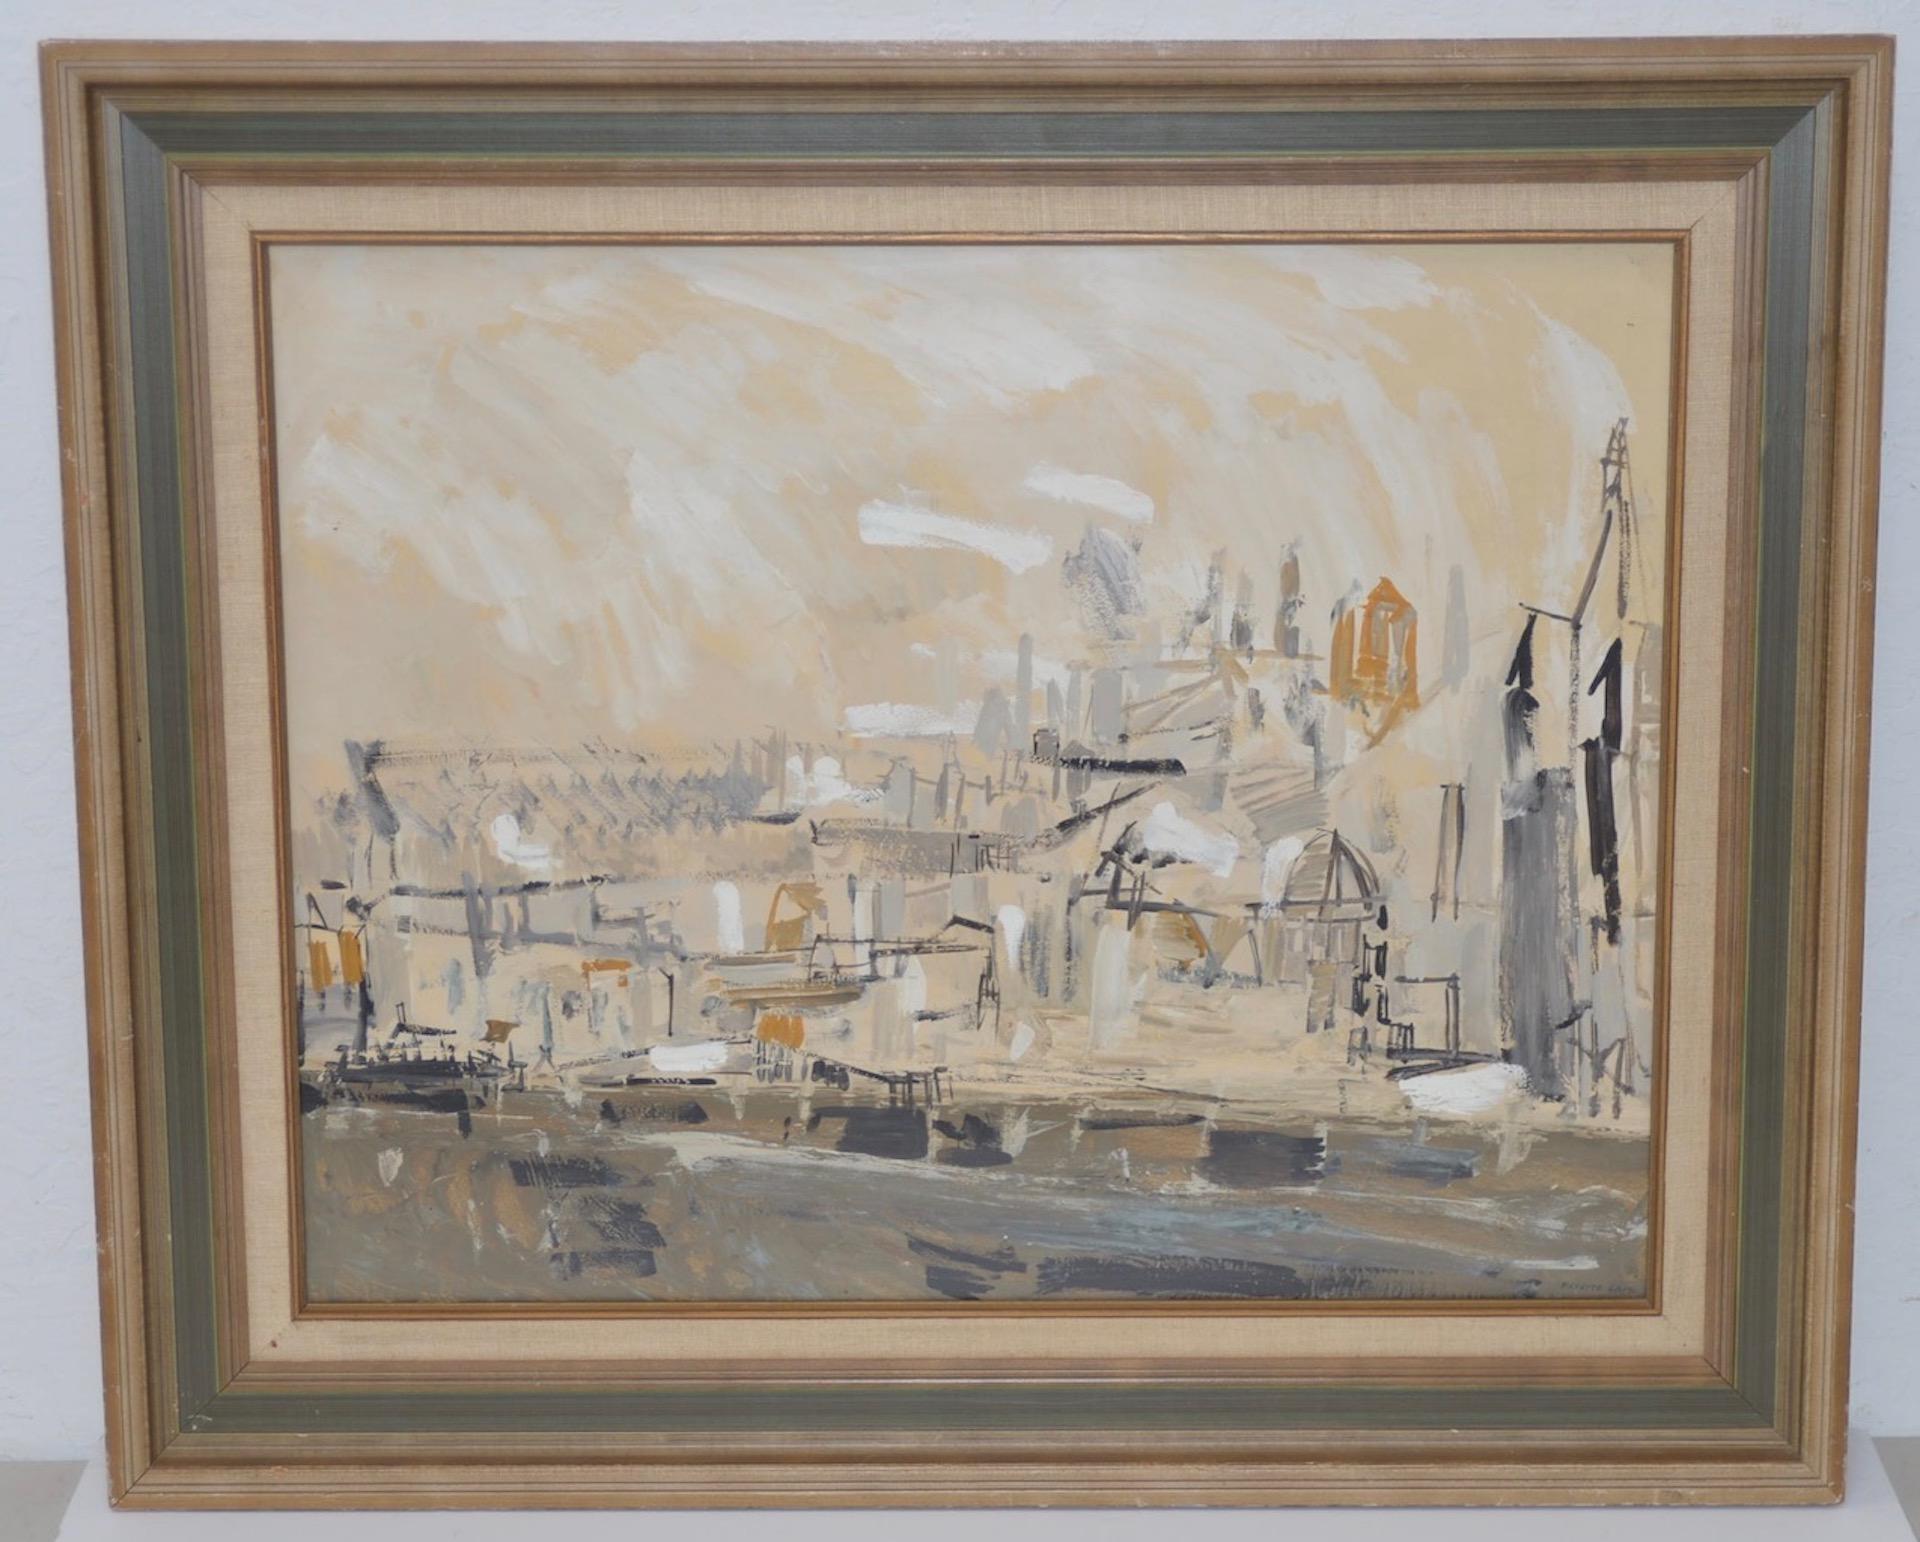 Maurice Lapp (1925-2014) Mid Modern Abstract Cityscape c.1950s

Fine oil painting by listed California artist Maurice Lapp.

Original oil on panel. Dimensions 23.5" x 18.5".

The original frame measures 30.5" x 25.5".

Very good condition. The frame